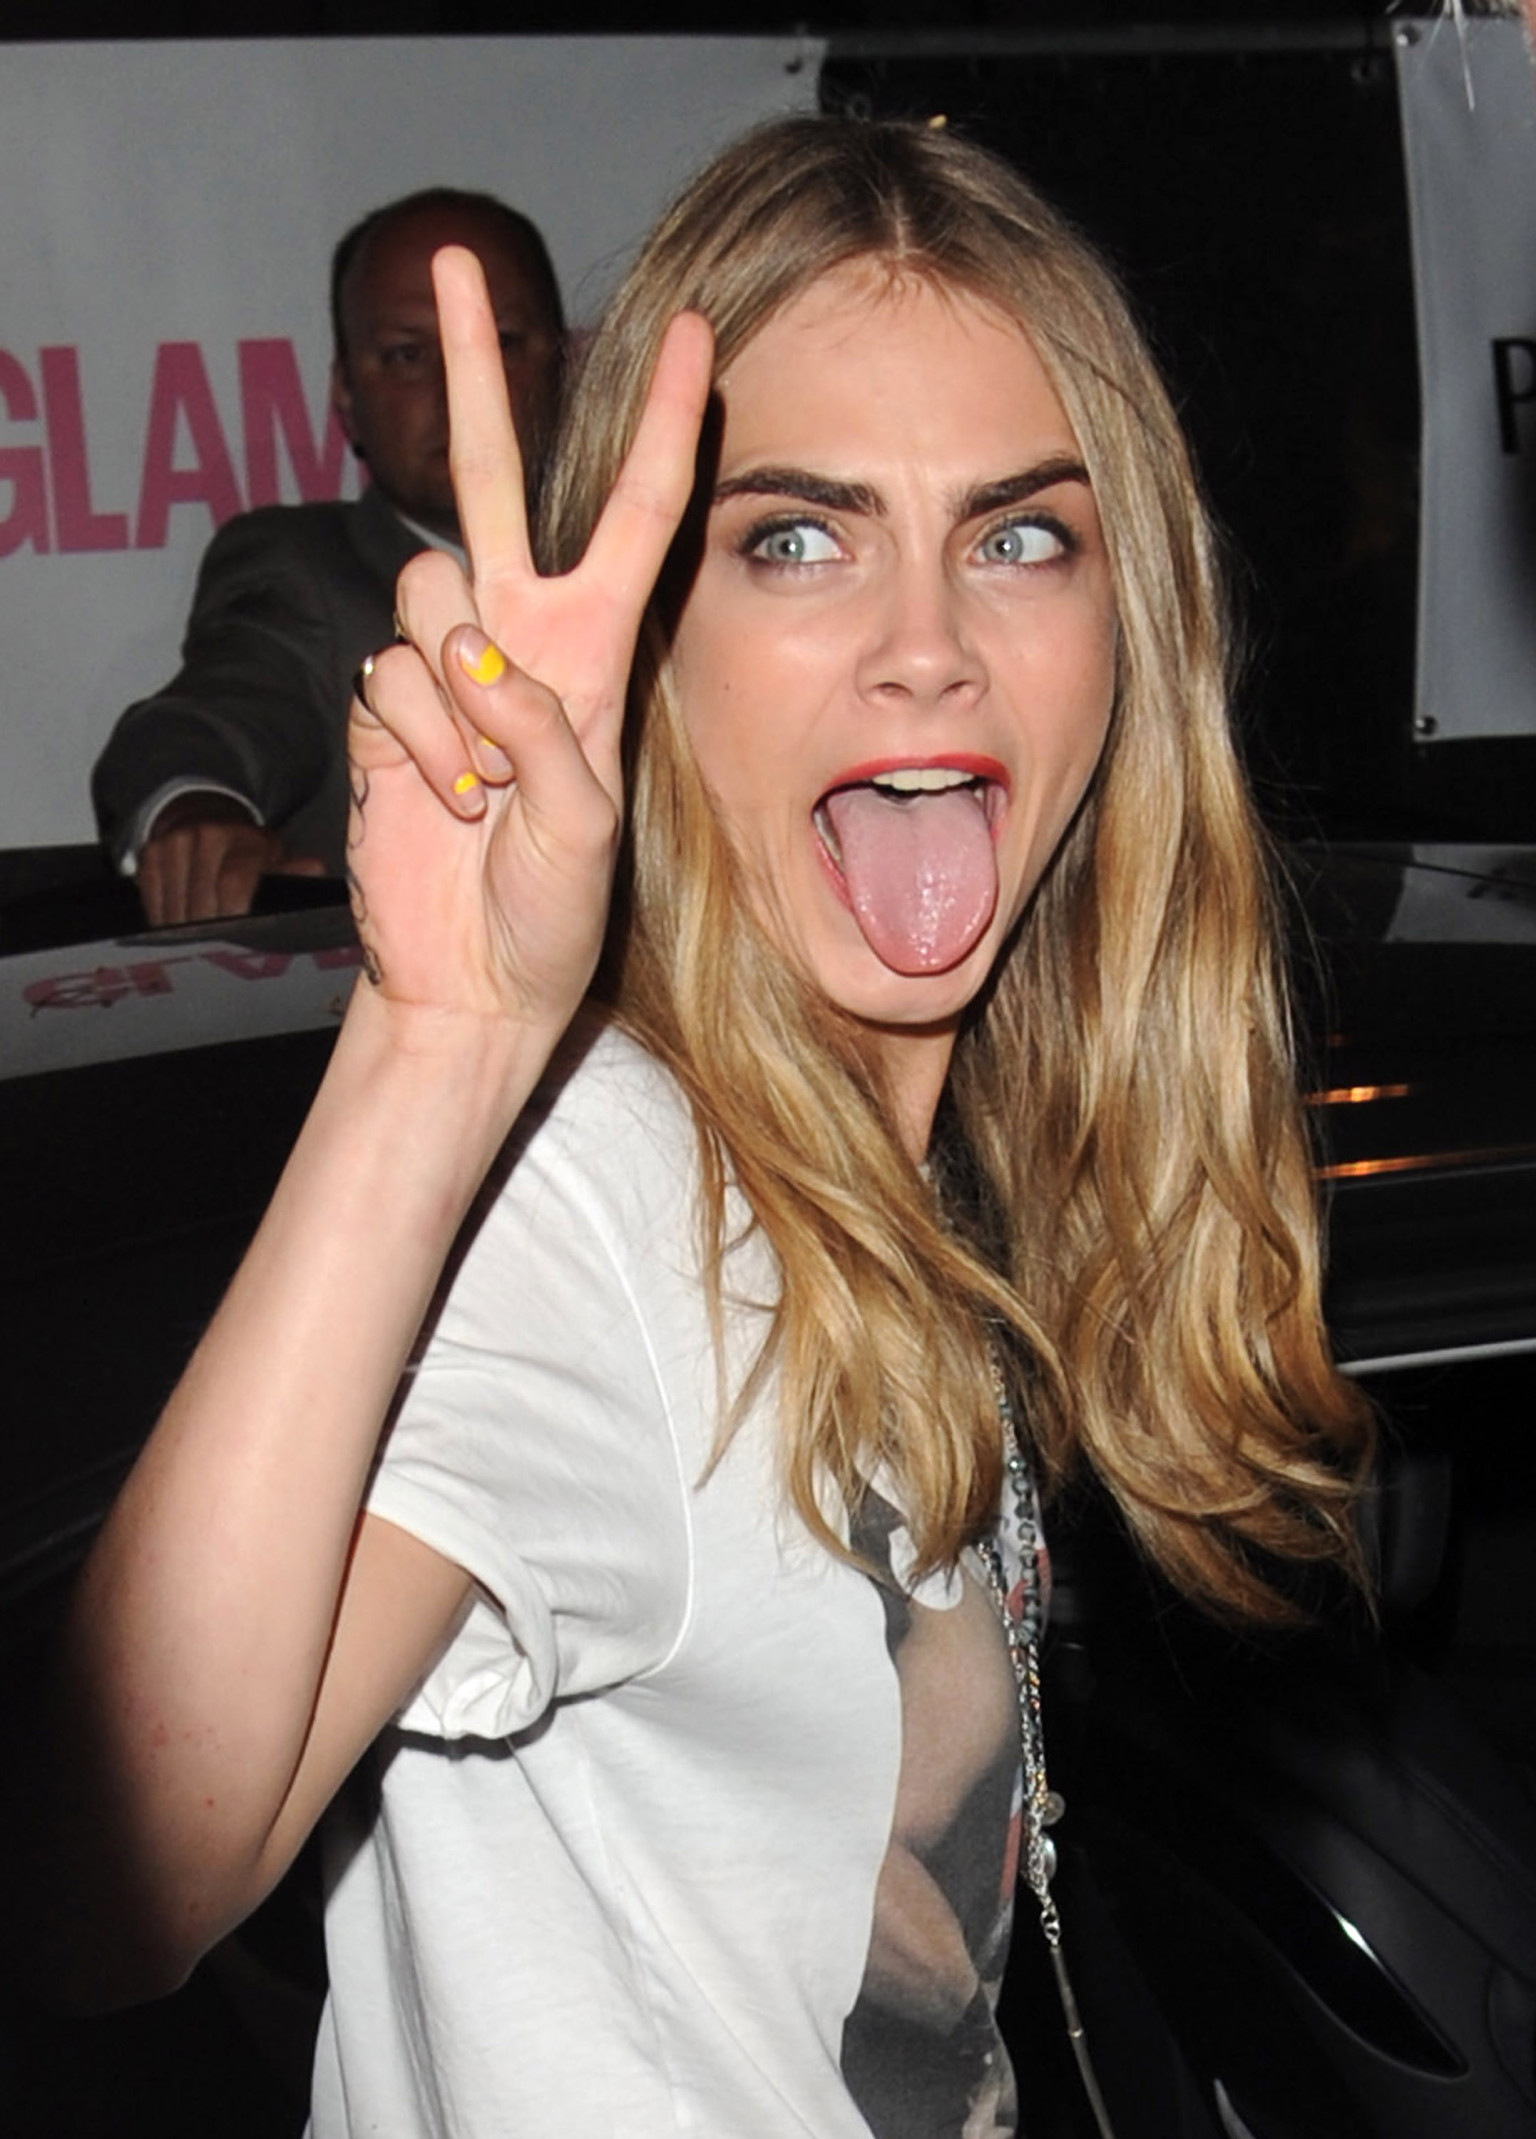 Cara Delevingne's Movie: What Will This Rumored Project Look Like